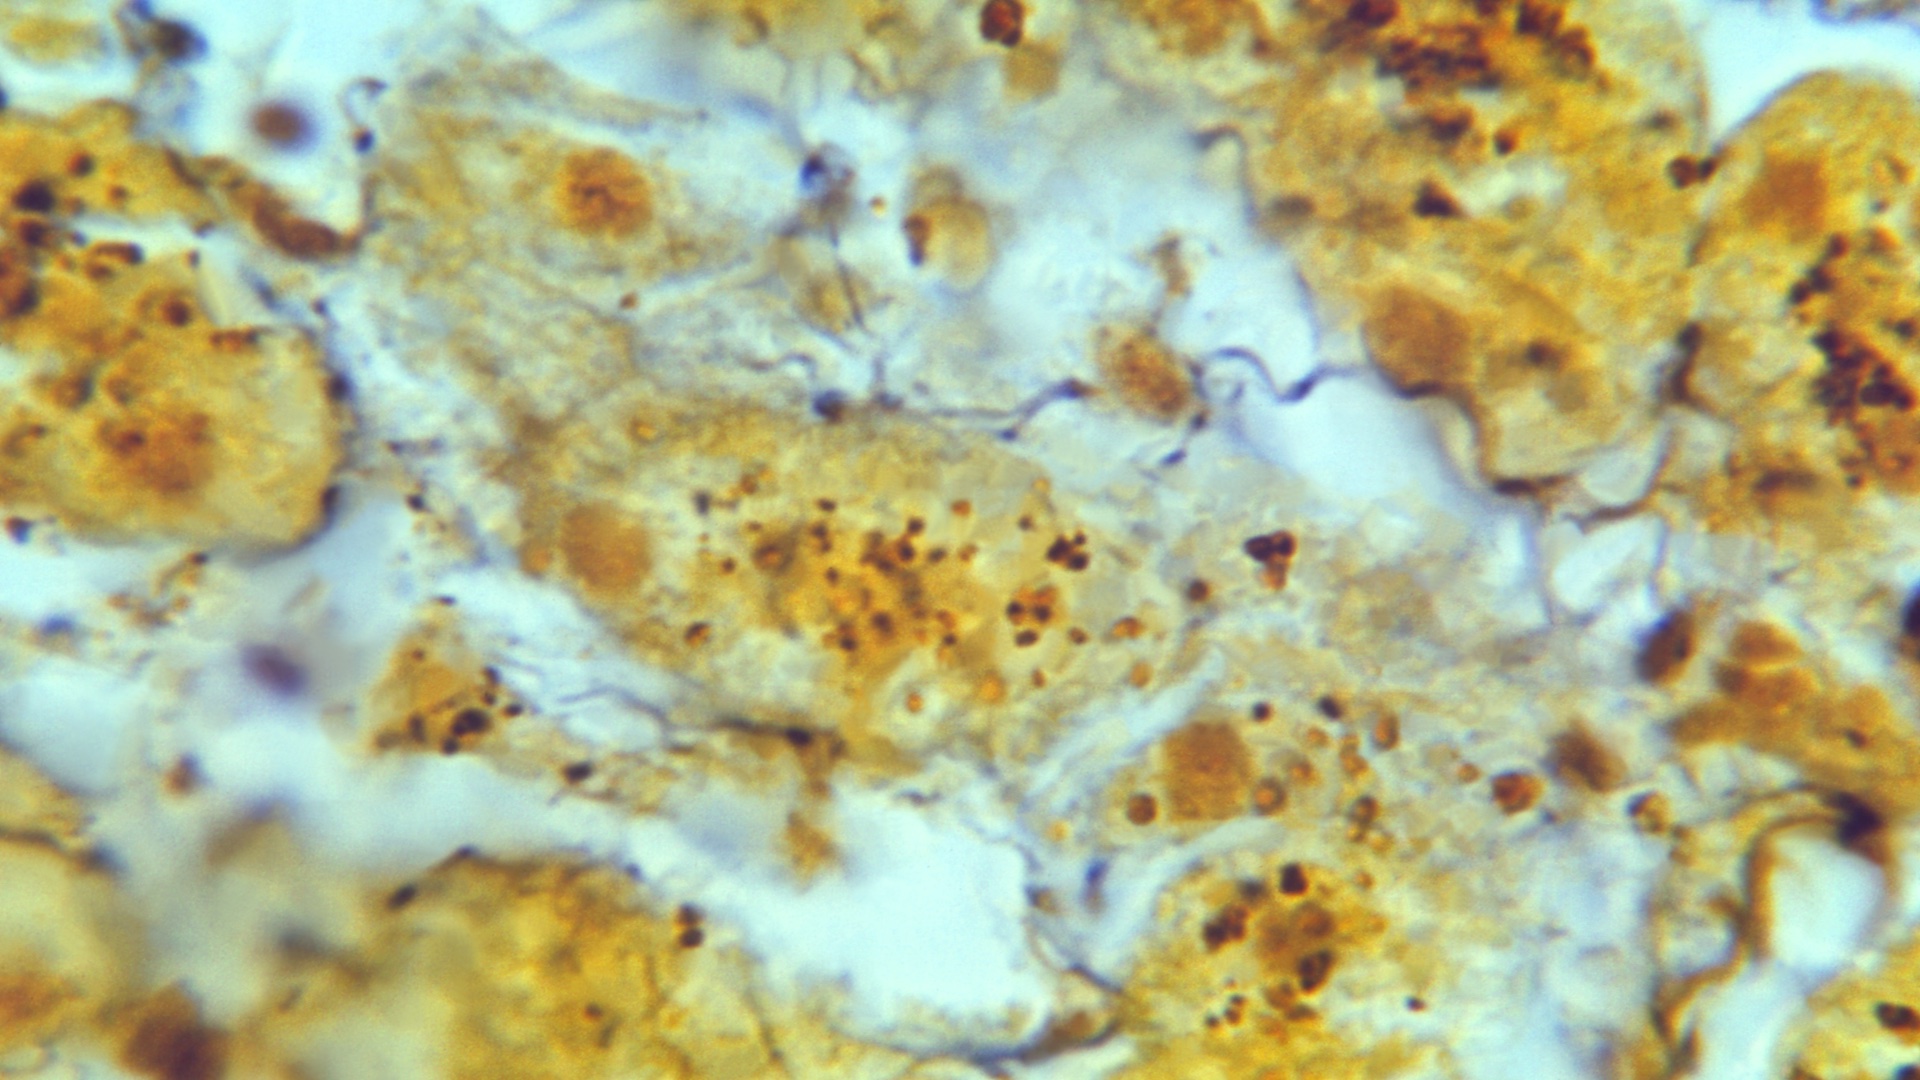 A liver tissue sample shows evidence of bacteria in the genus Leptospira